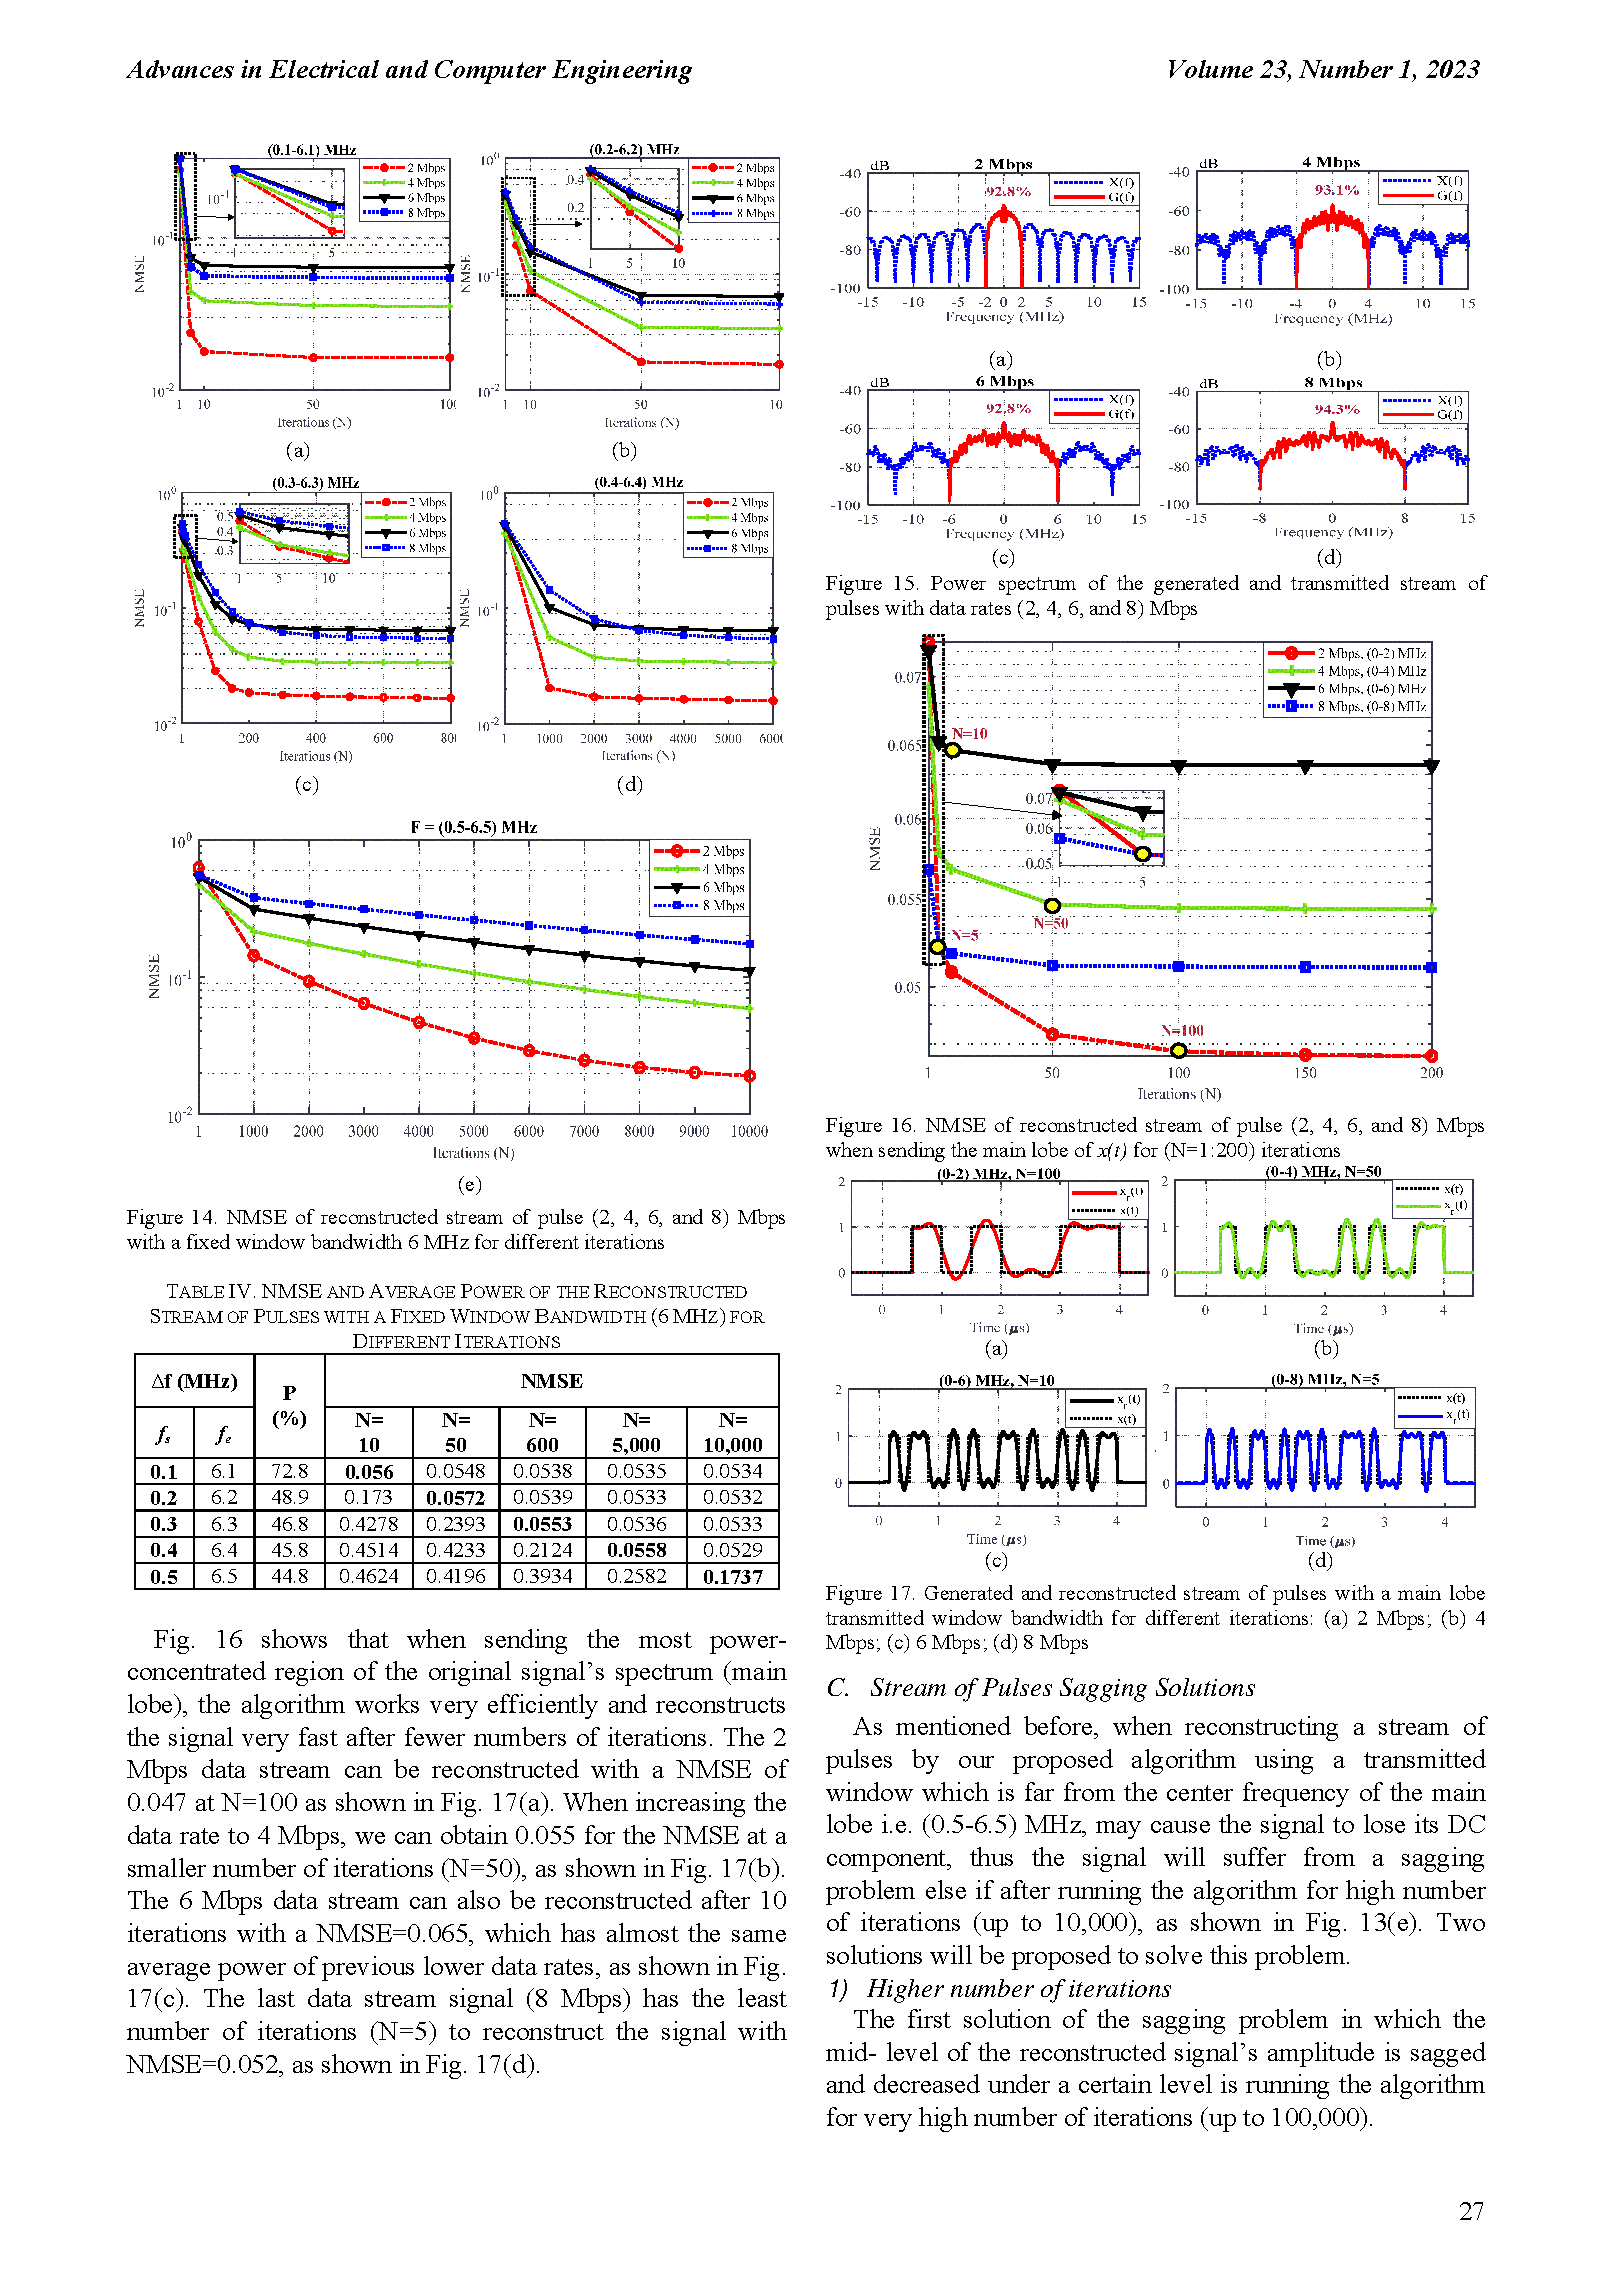 PDF Quickview for paper with DOI:10.4316/AECE.2023.01003